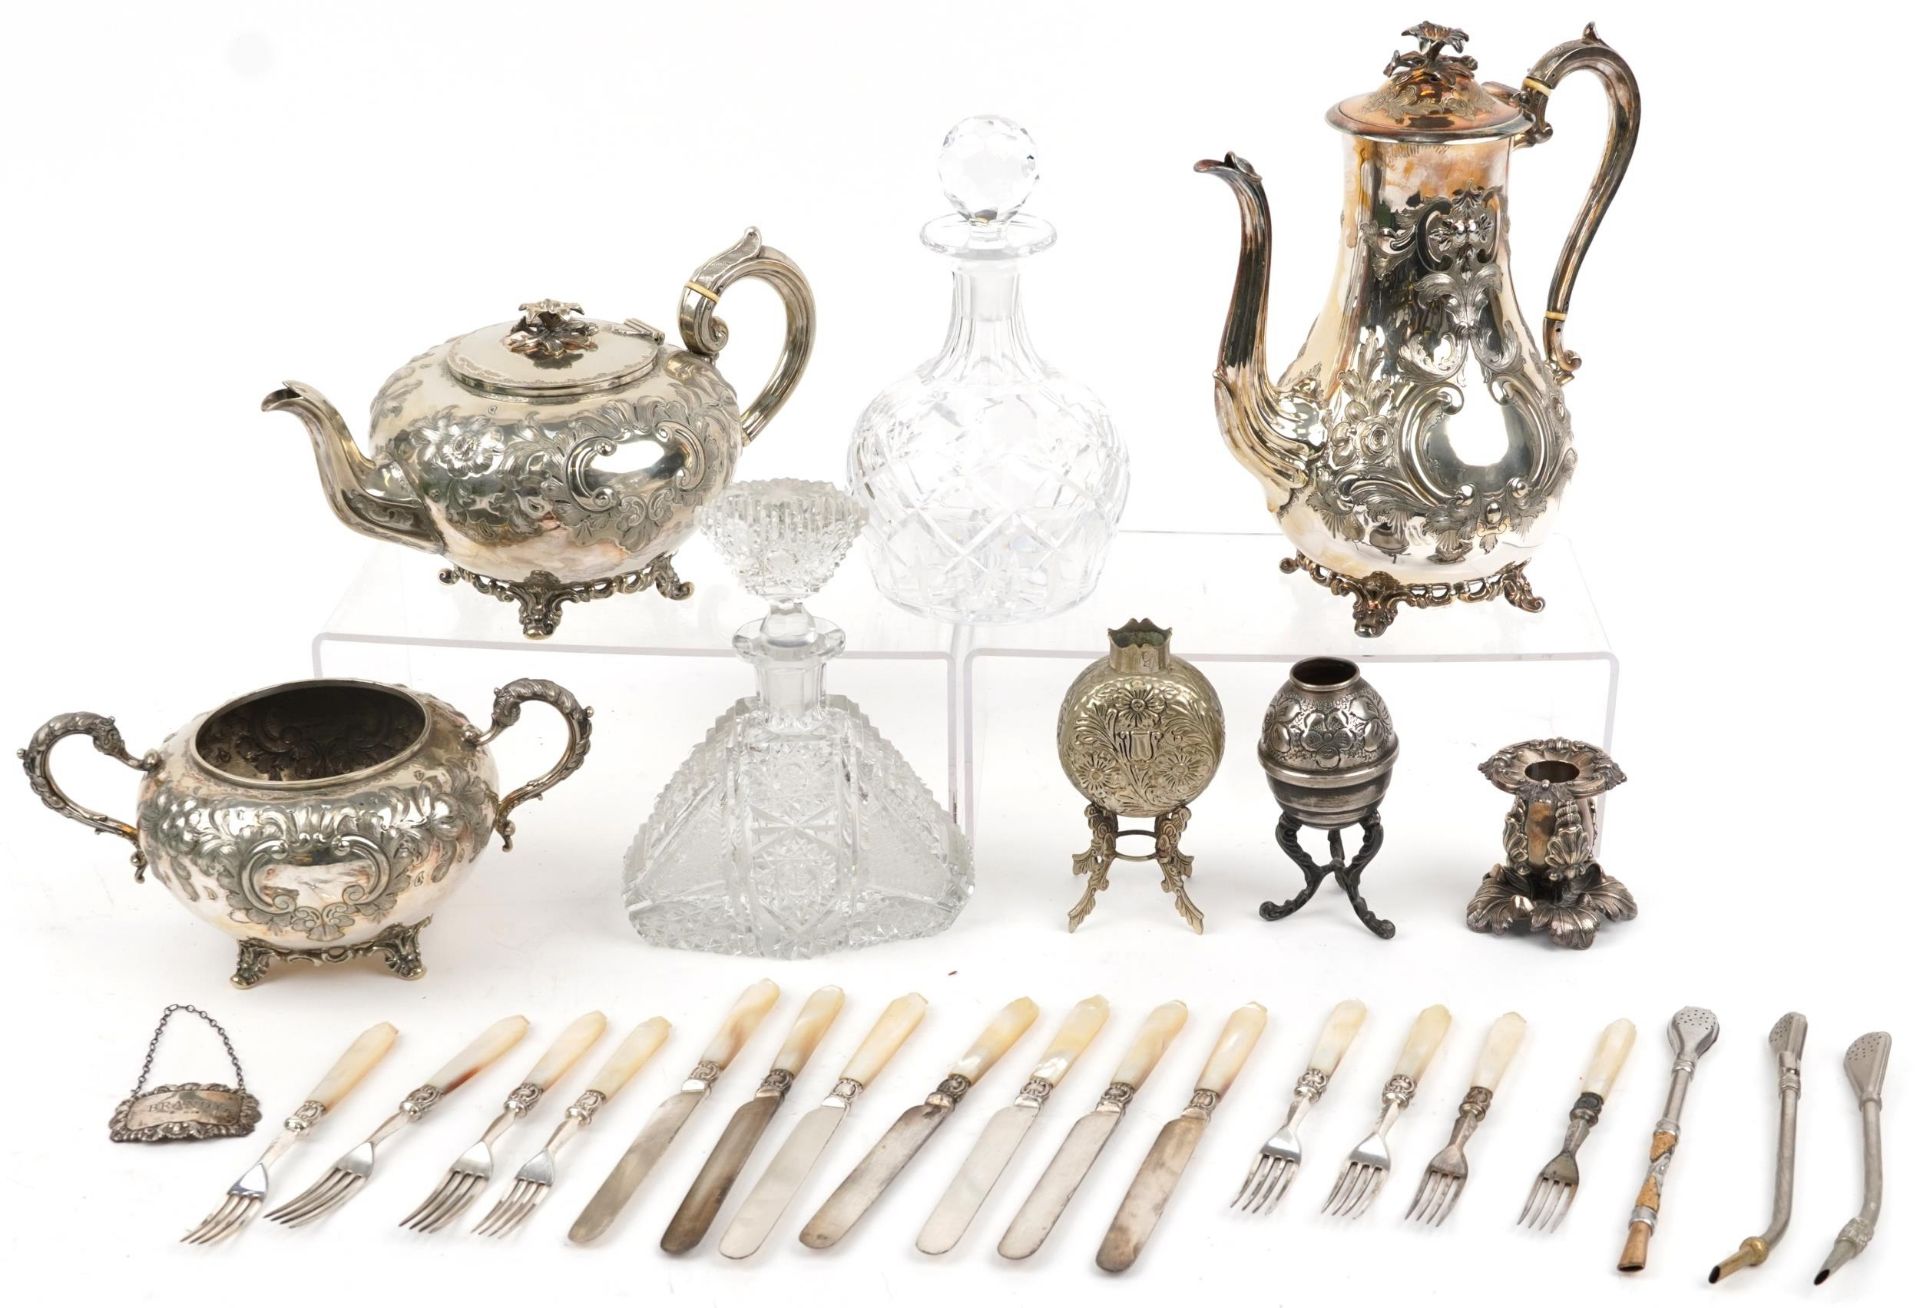 Silver, silverplate and glassware including two cut glass decanters, one with silver brandy decanter